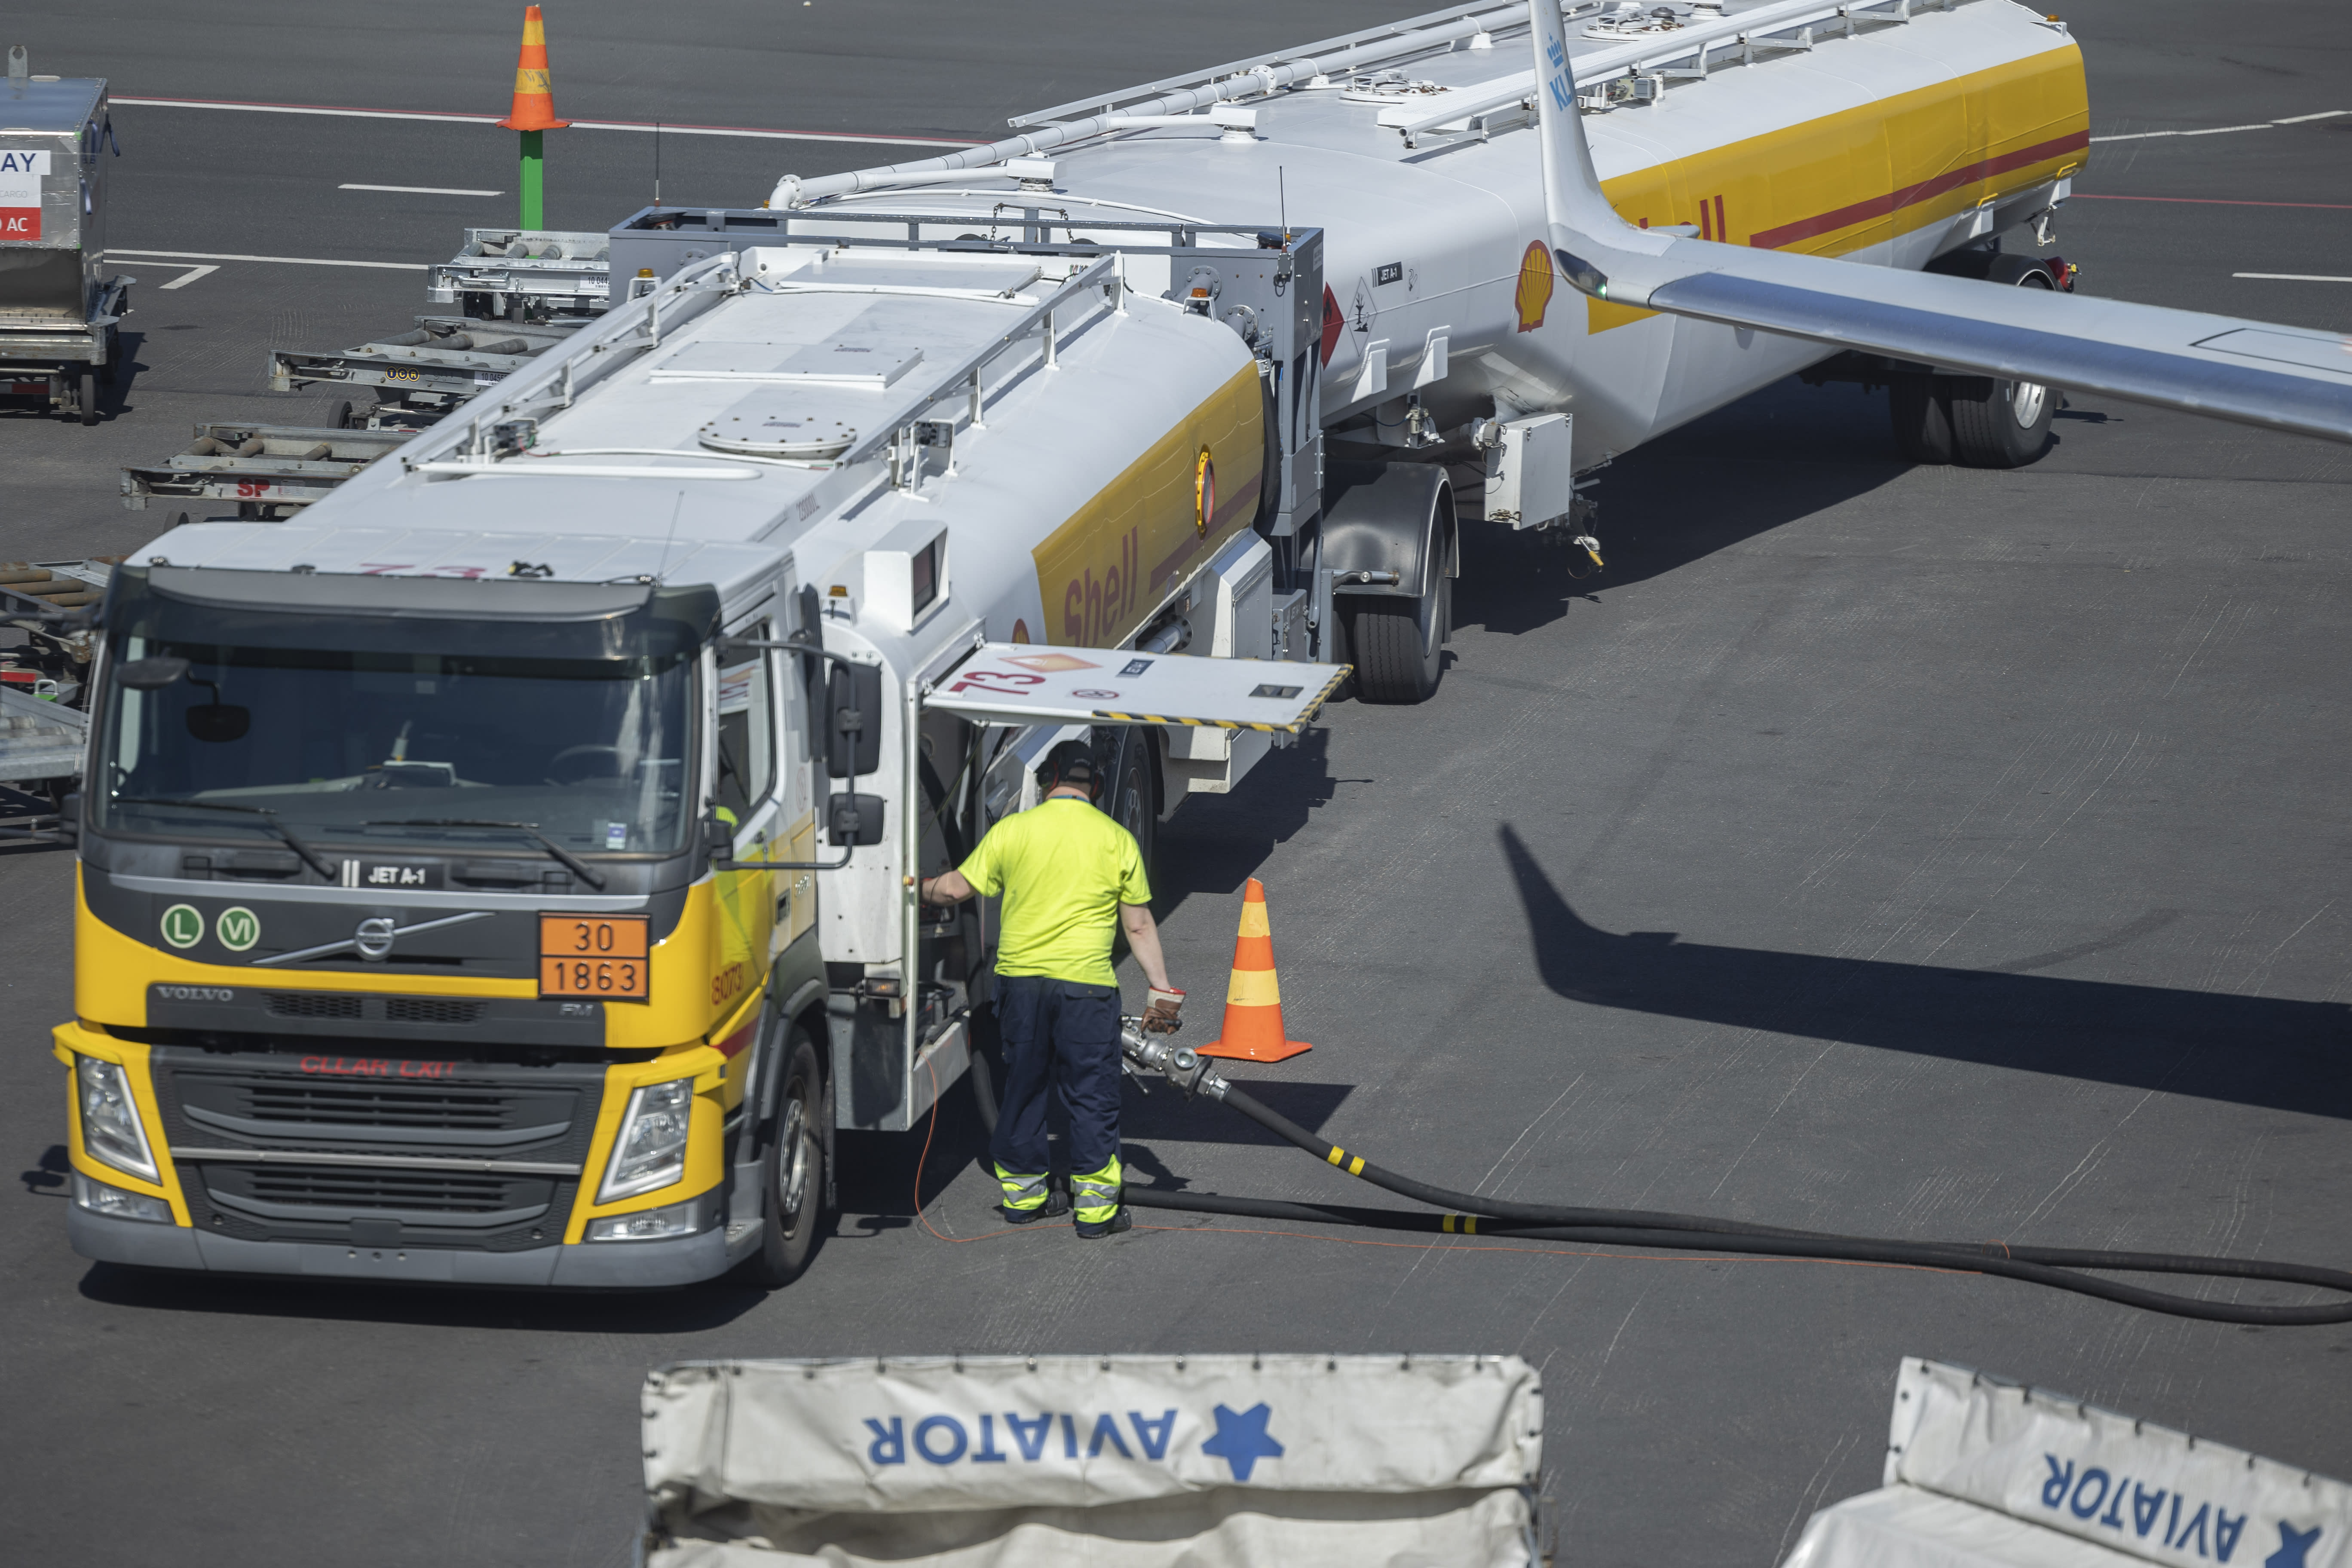 Helsinki-Vantaa Airport will face a shortage of aviation fuel within a week